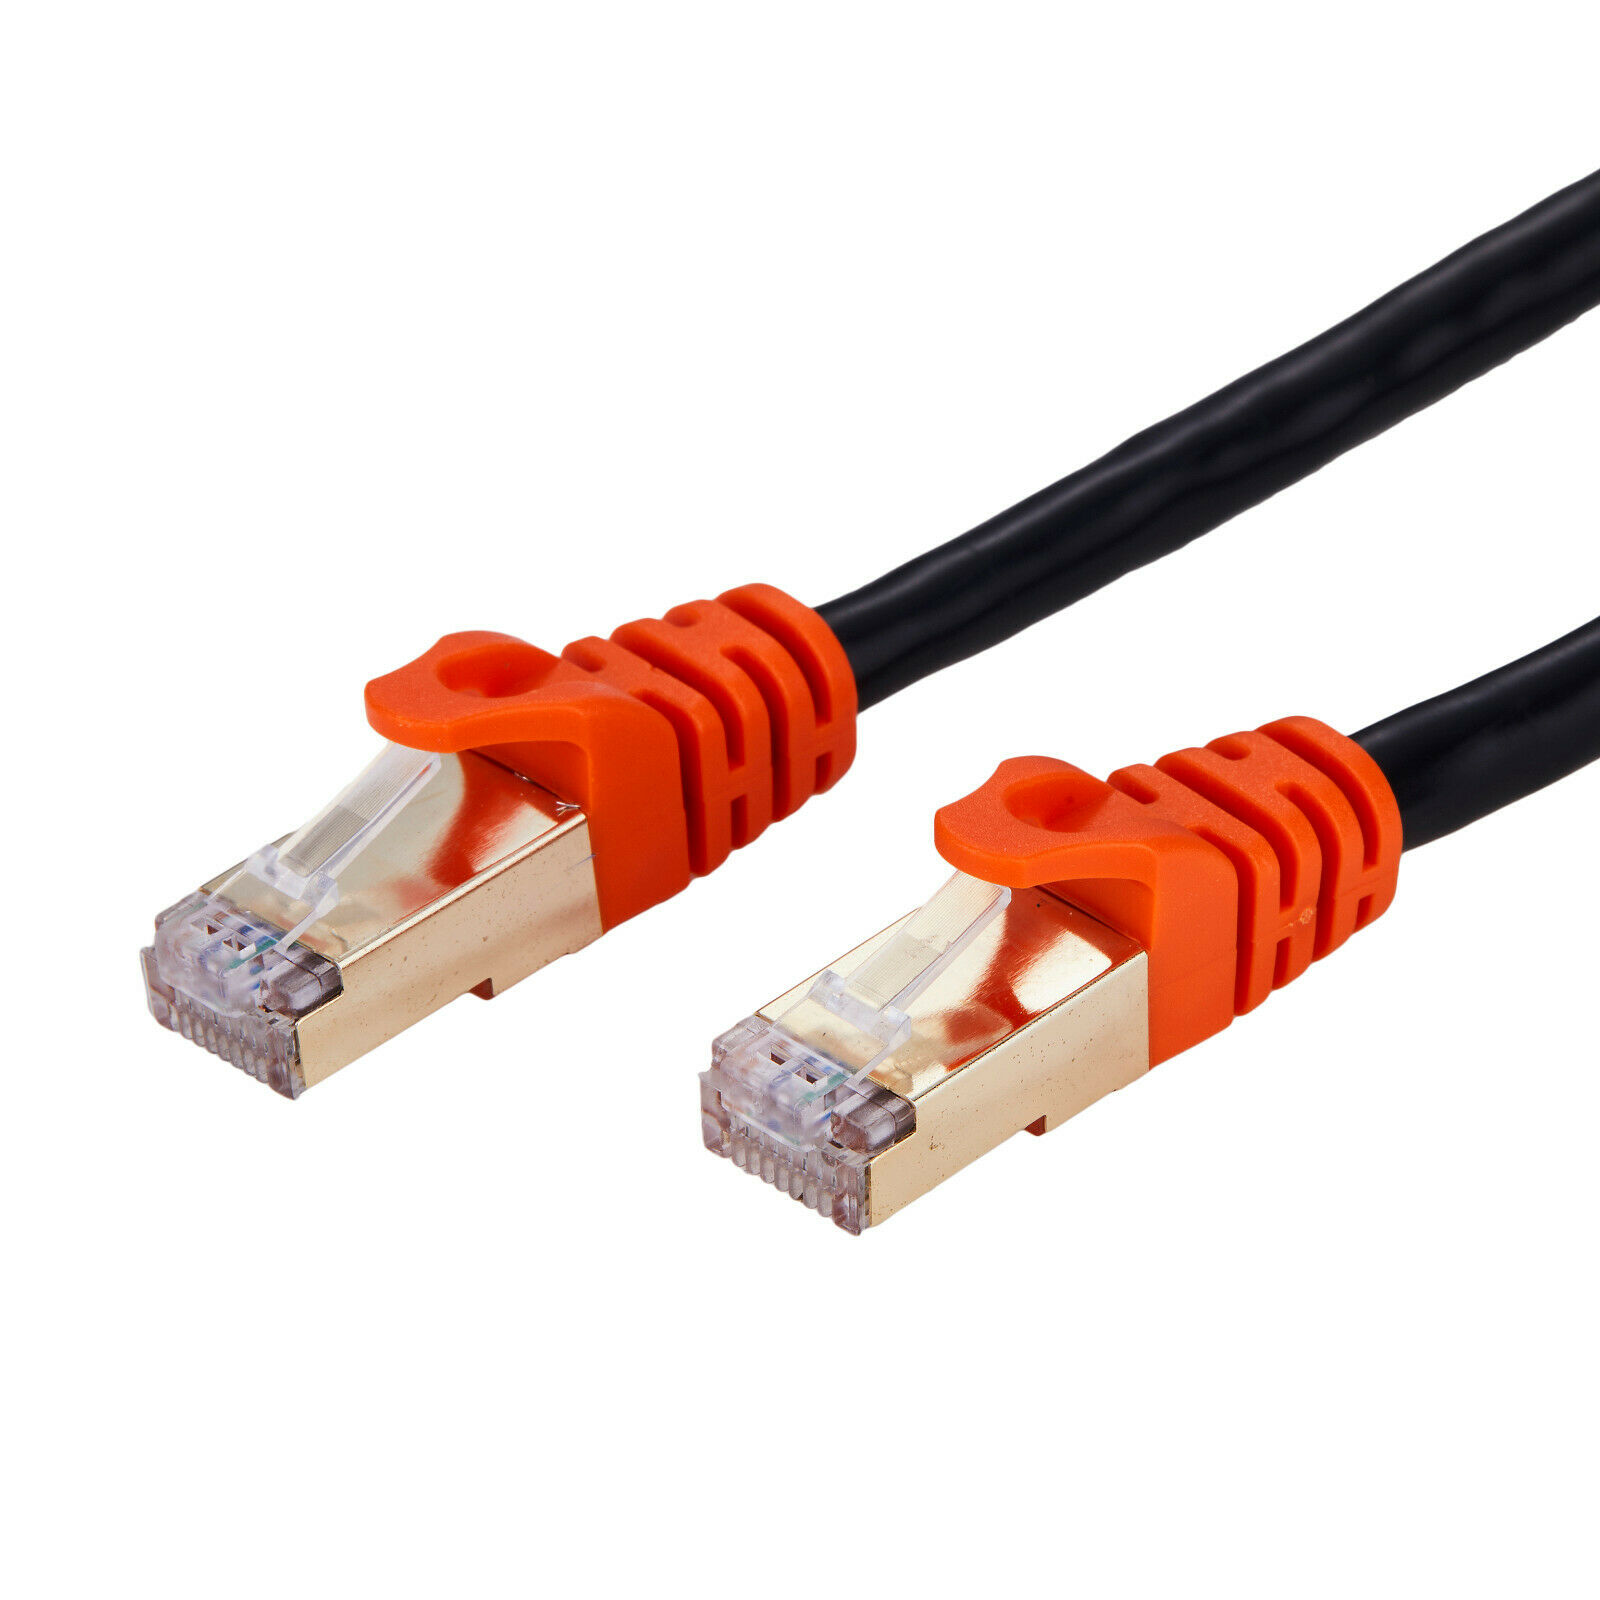 Cables Direct Online 75FT Cat7 Outdoor Ethernet Cable 26AWG SFTP Heavy-Duty Cat 7 Networking Patch Cord RJ45 600Mhz Waterproof Direct Burial 